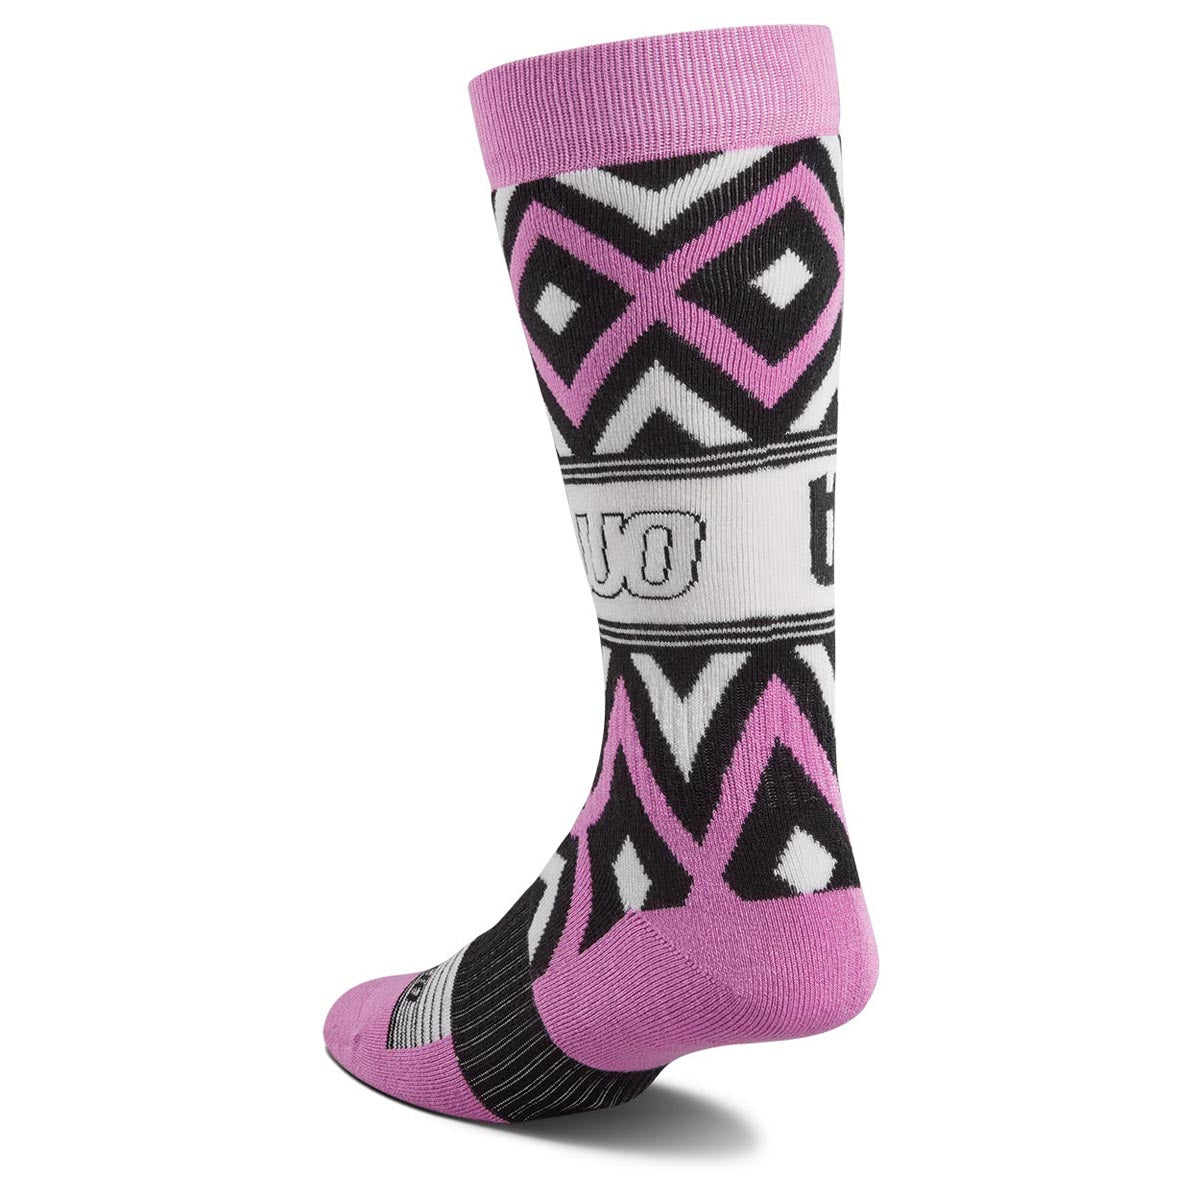 Thirty Two Womens Double 2024 Snowboard Socks - Lavender image 2